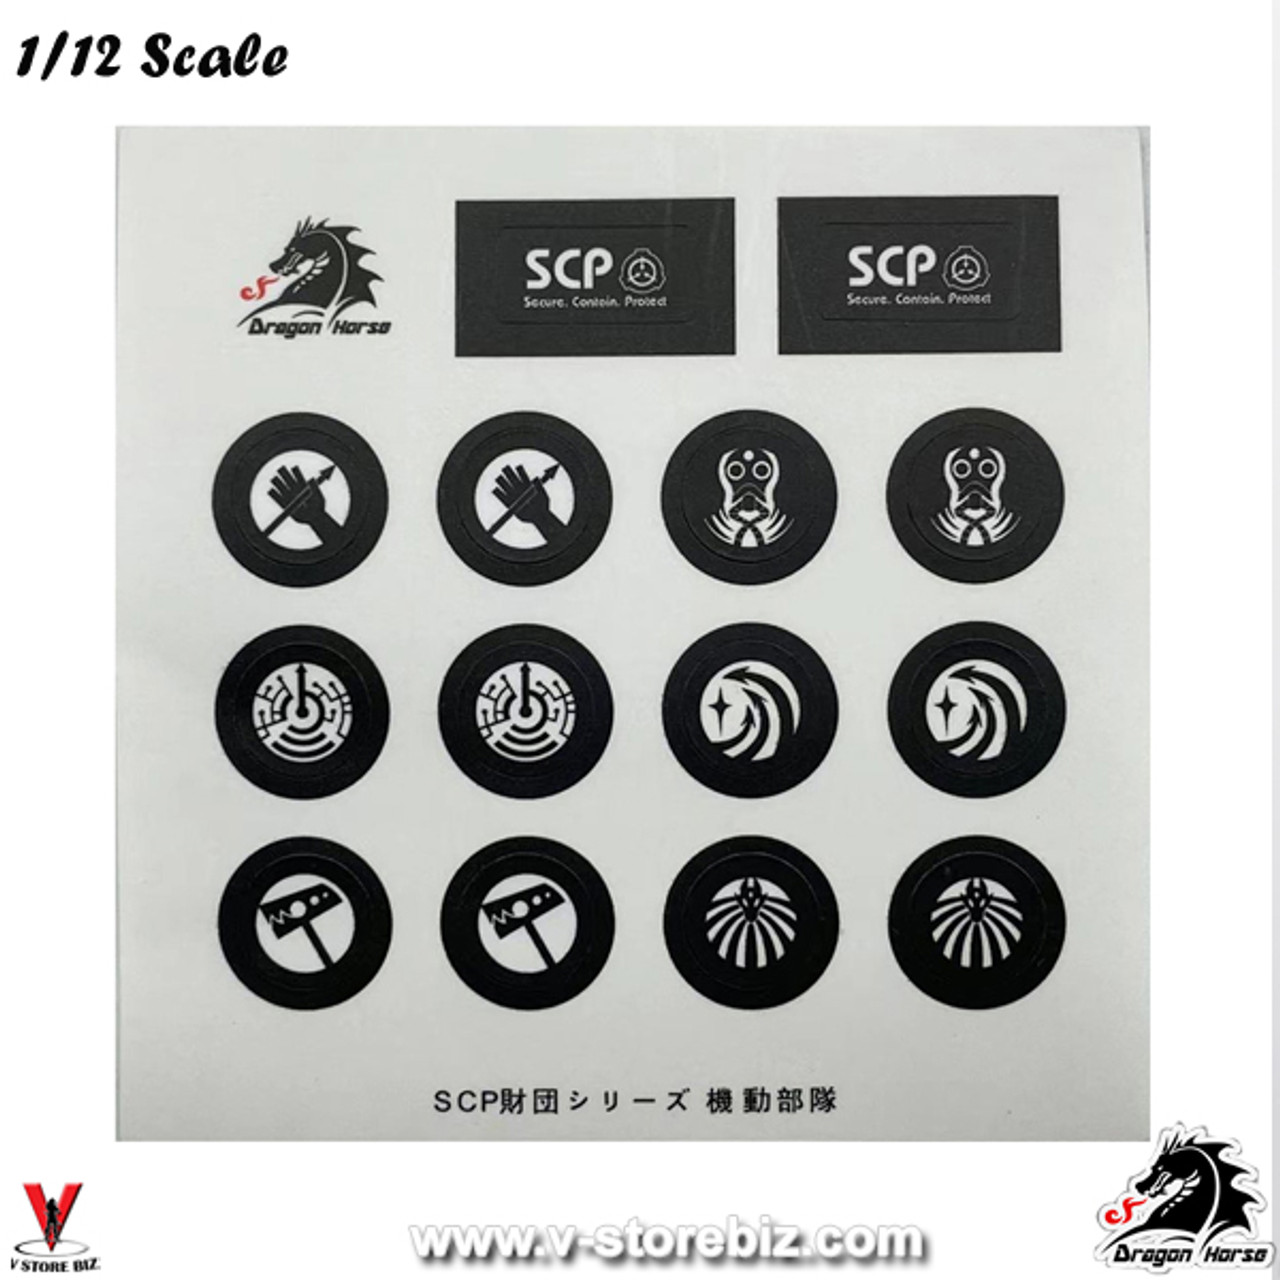 Scp league - secure contain protect scp foundation Mouse Pad